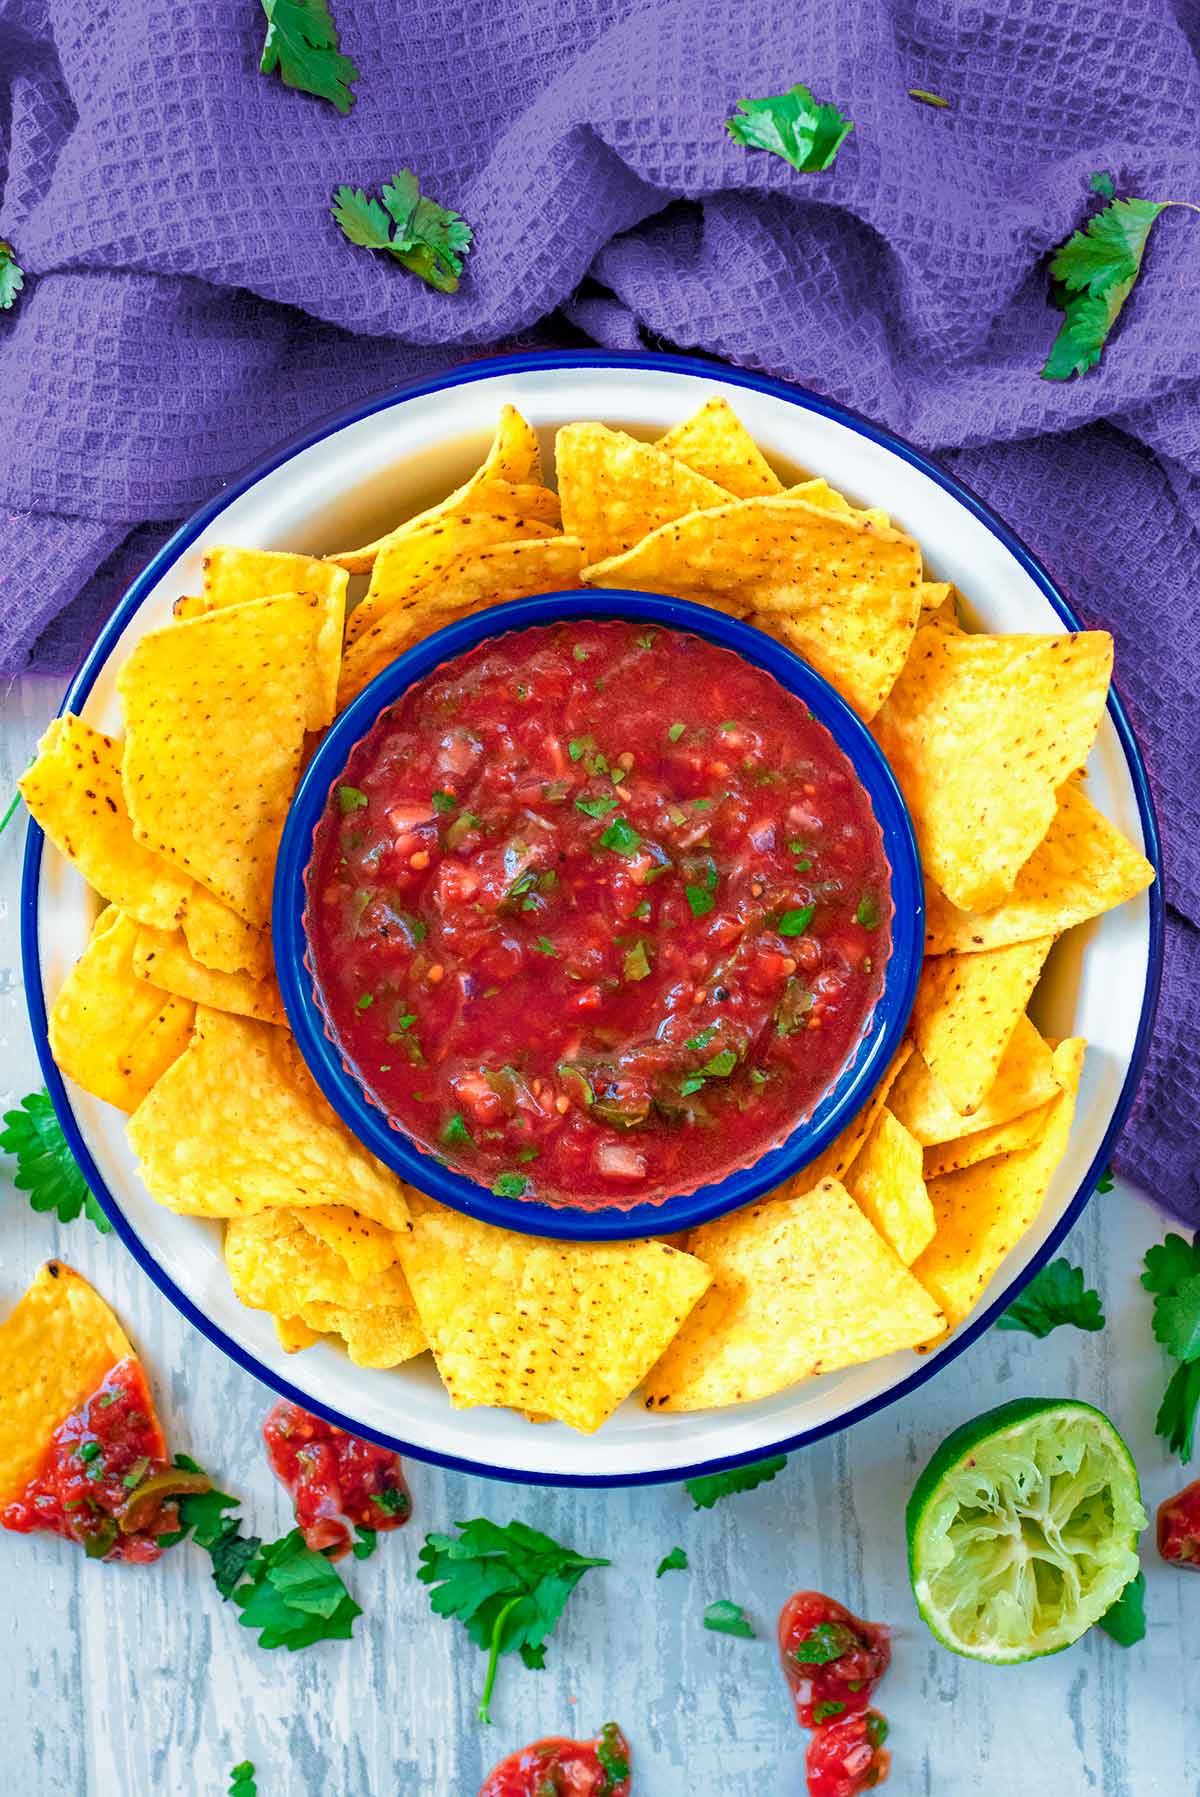 A bowl of tomato salsa surrounded by tortilla chips.